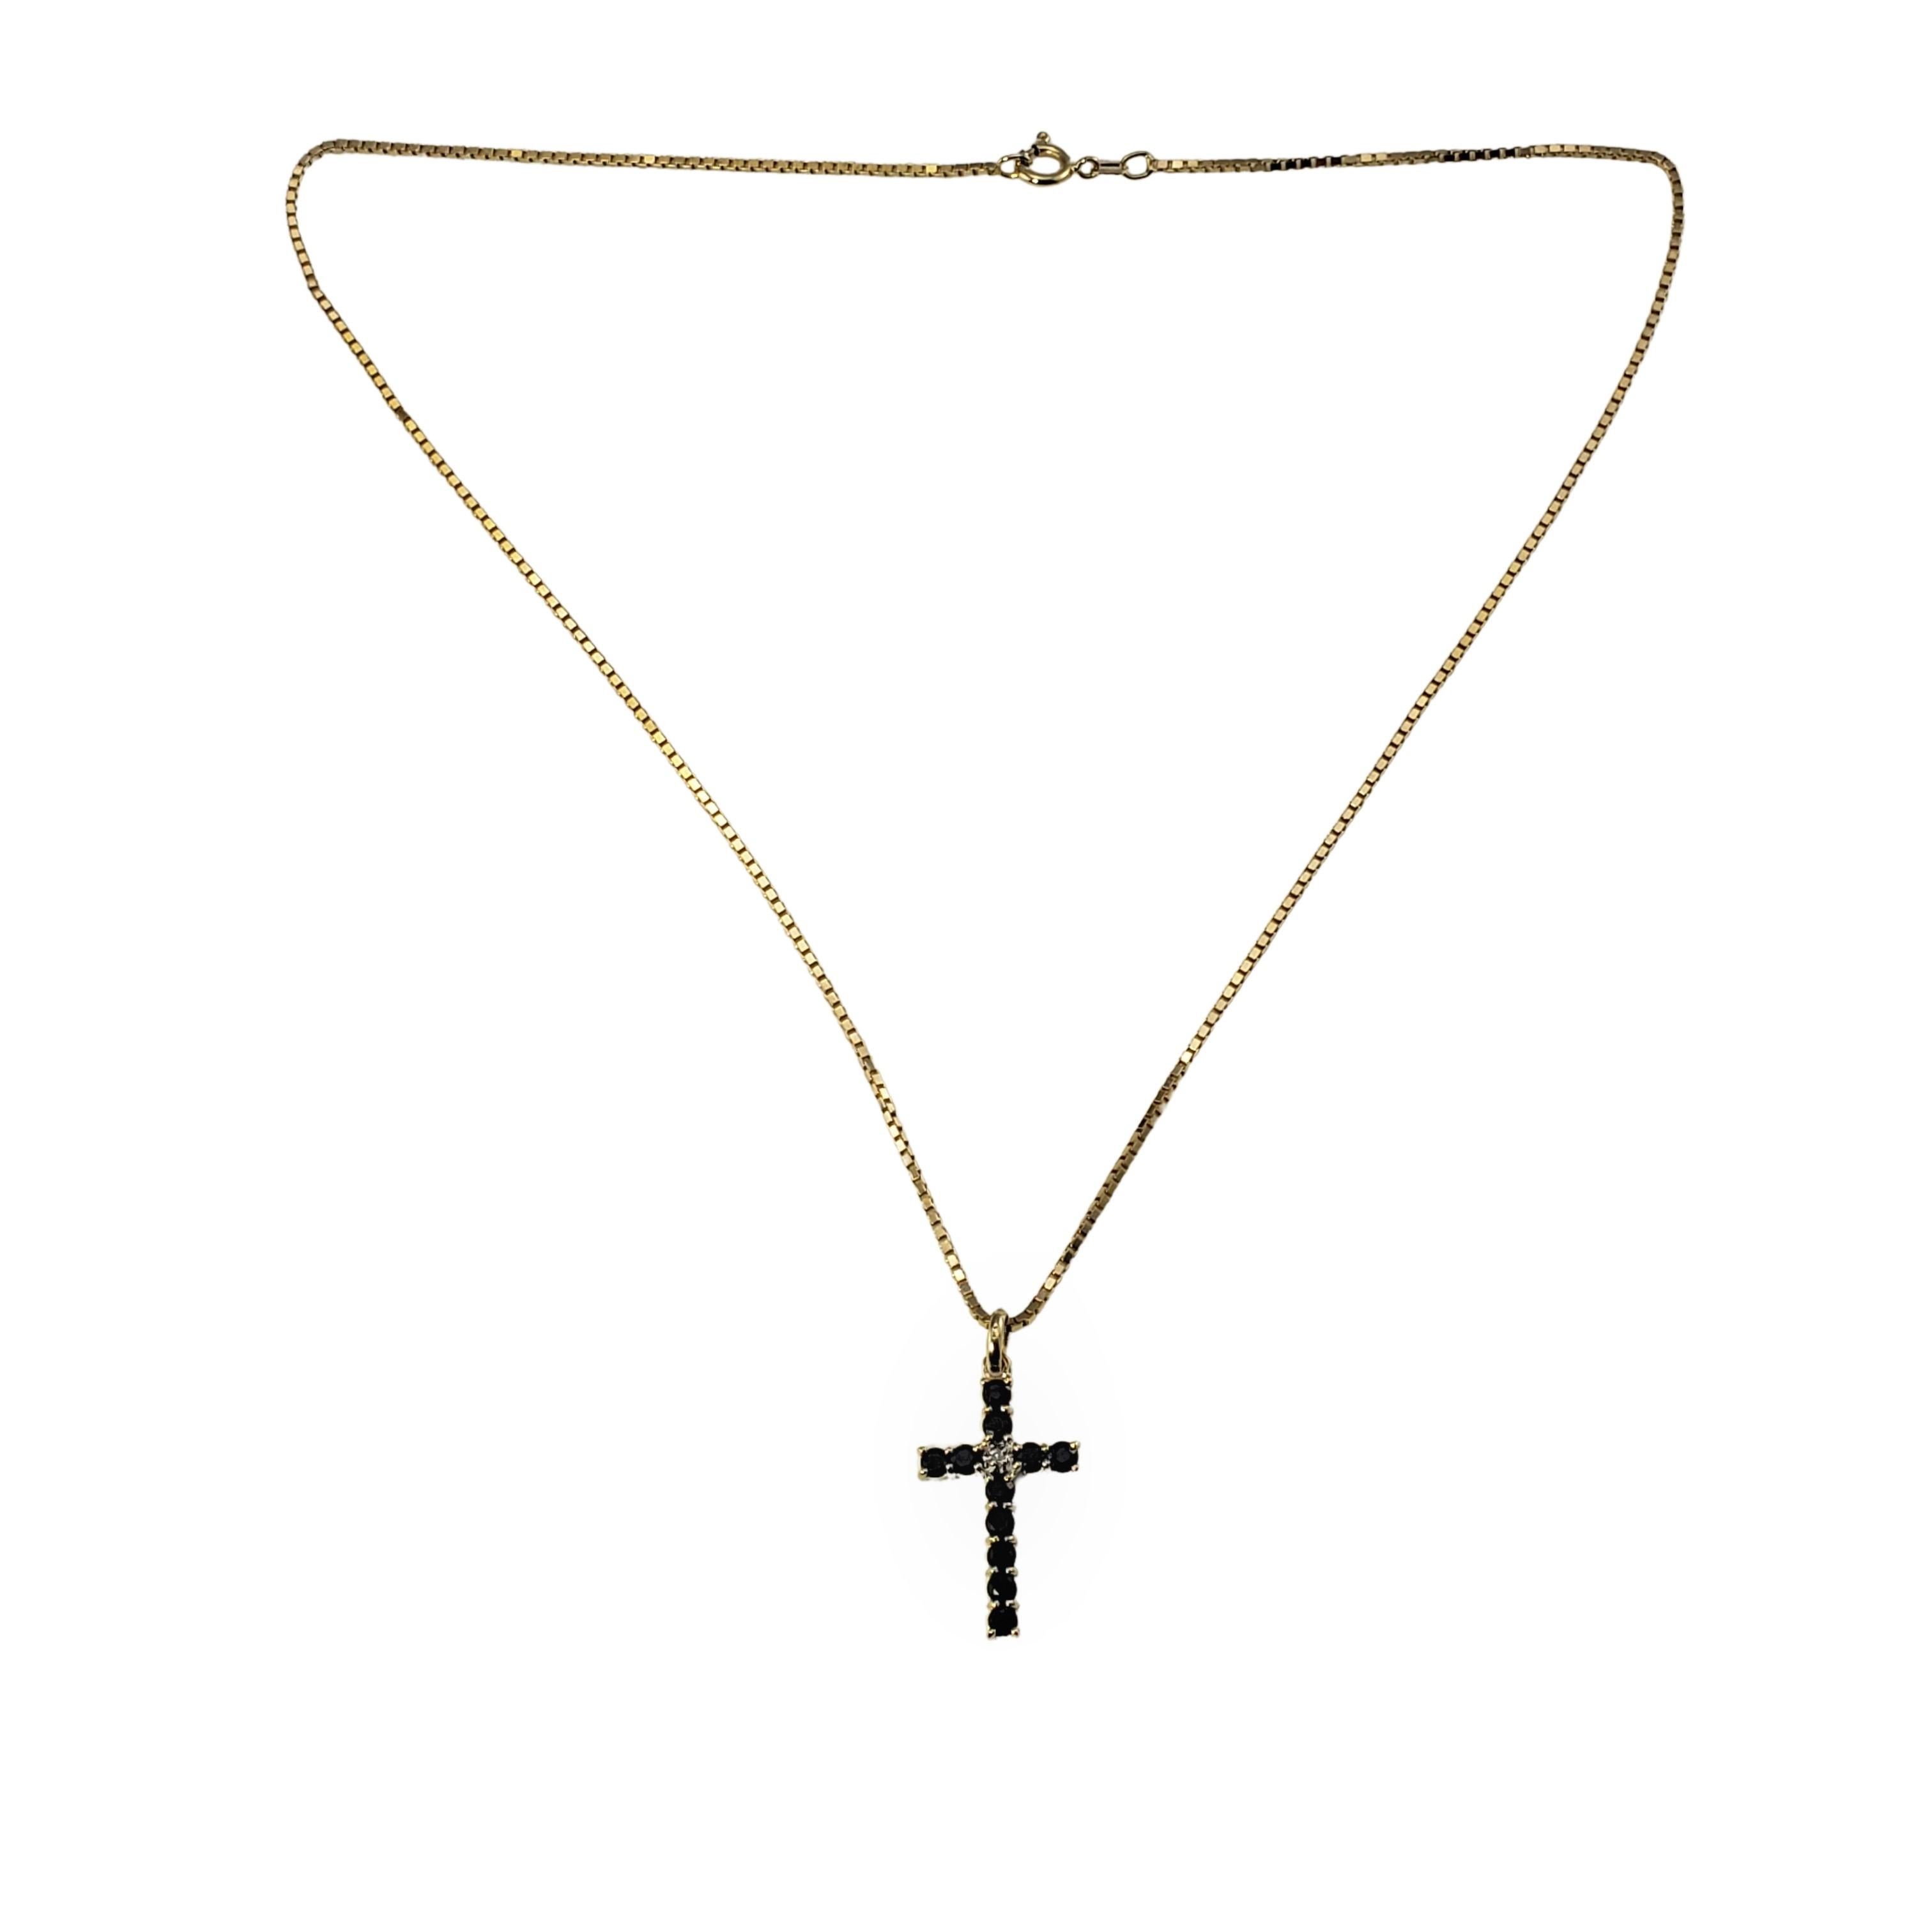 14 Karat Yellow Gold Sapphire and Diamond Cross Pendant Necklace-

This lovely cross pendant features 11 sapphires and one round single cut diamond set in classic 14K yellow gold.  Suspends from a classic box chain.

Approximate total diamond